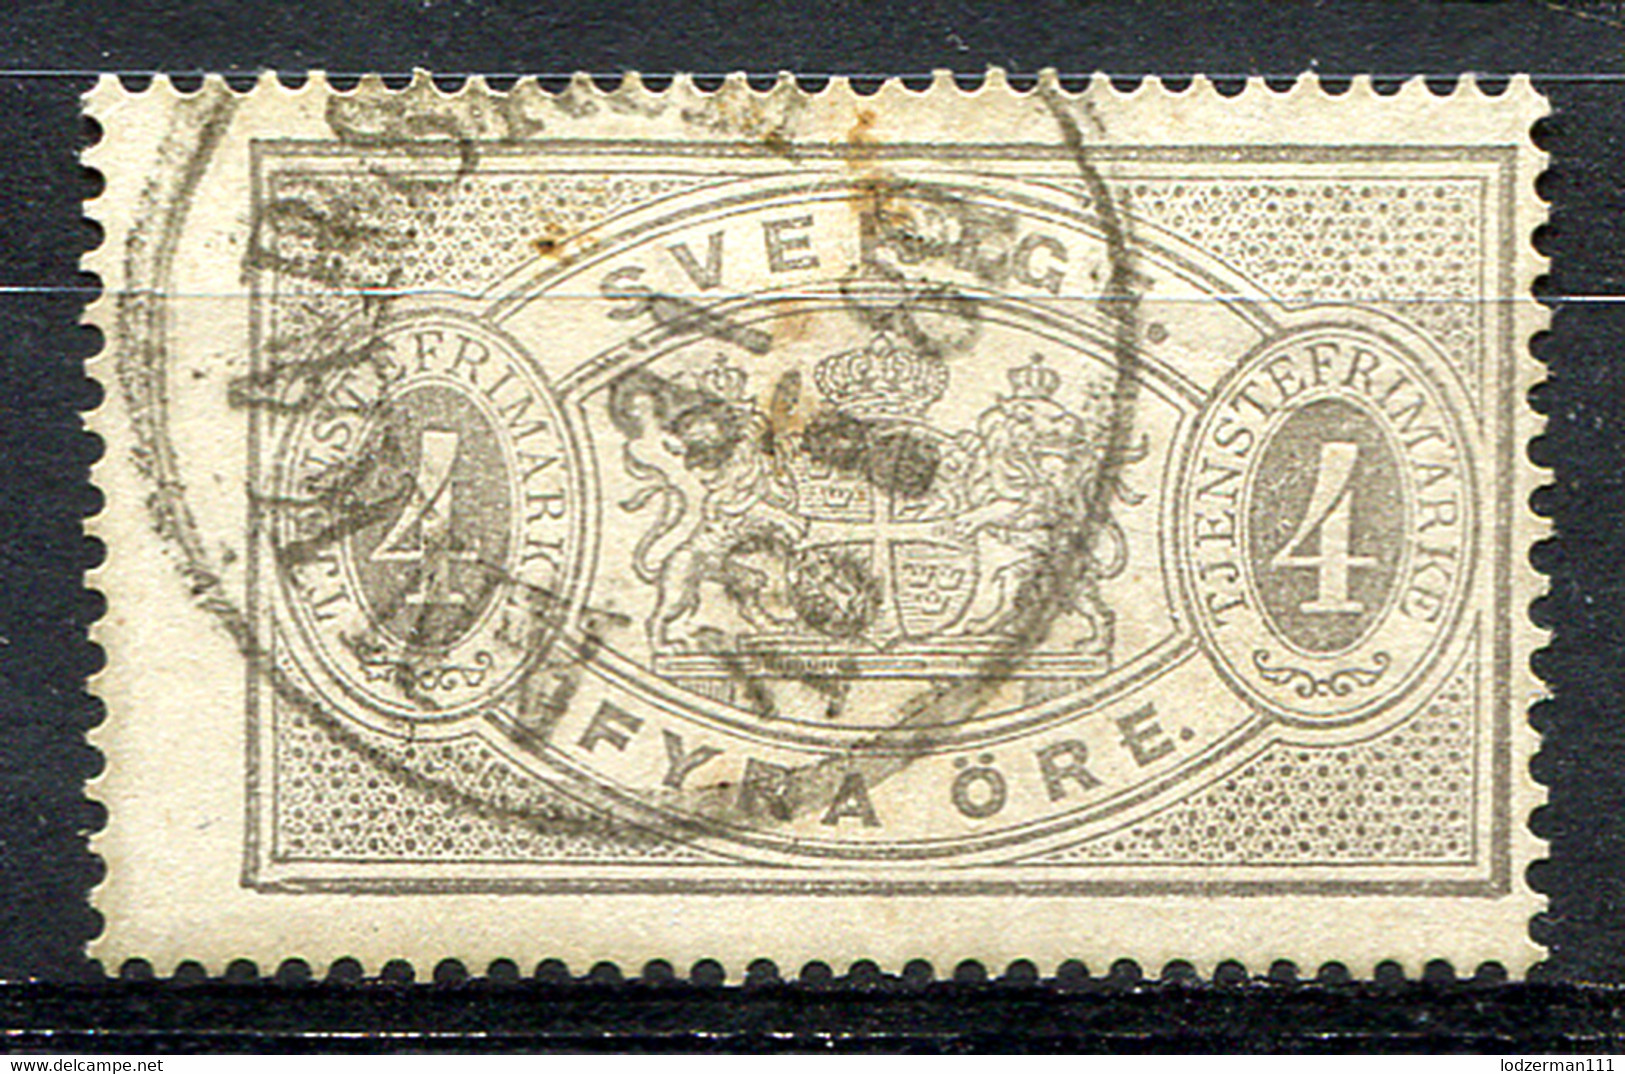 SWEDEN 1874 Perf.14 - Yv.2B (Mi.2A, Sc.O2) Used (VF) - Officials